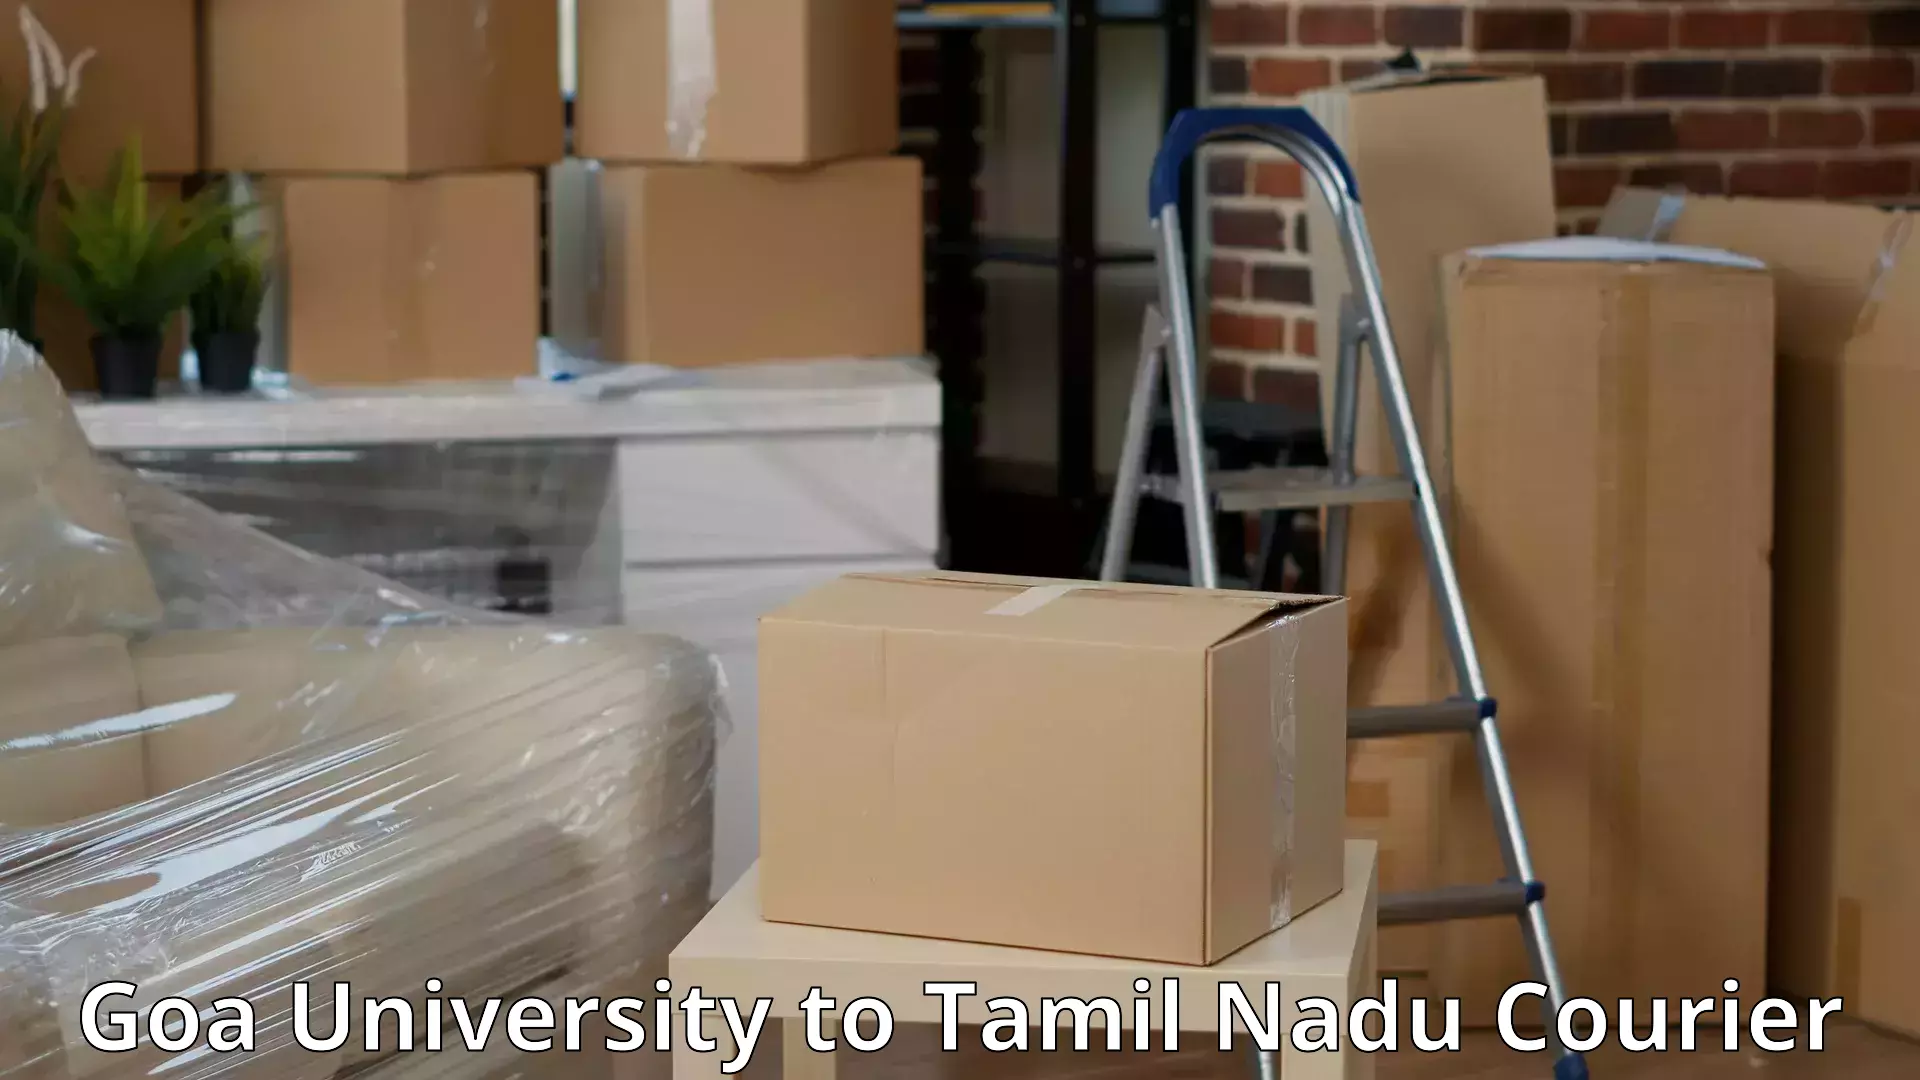 Trusted relocation experts Goa University to Trichy